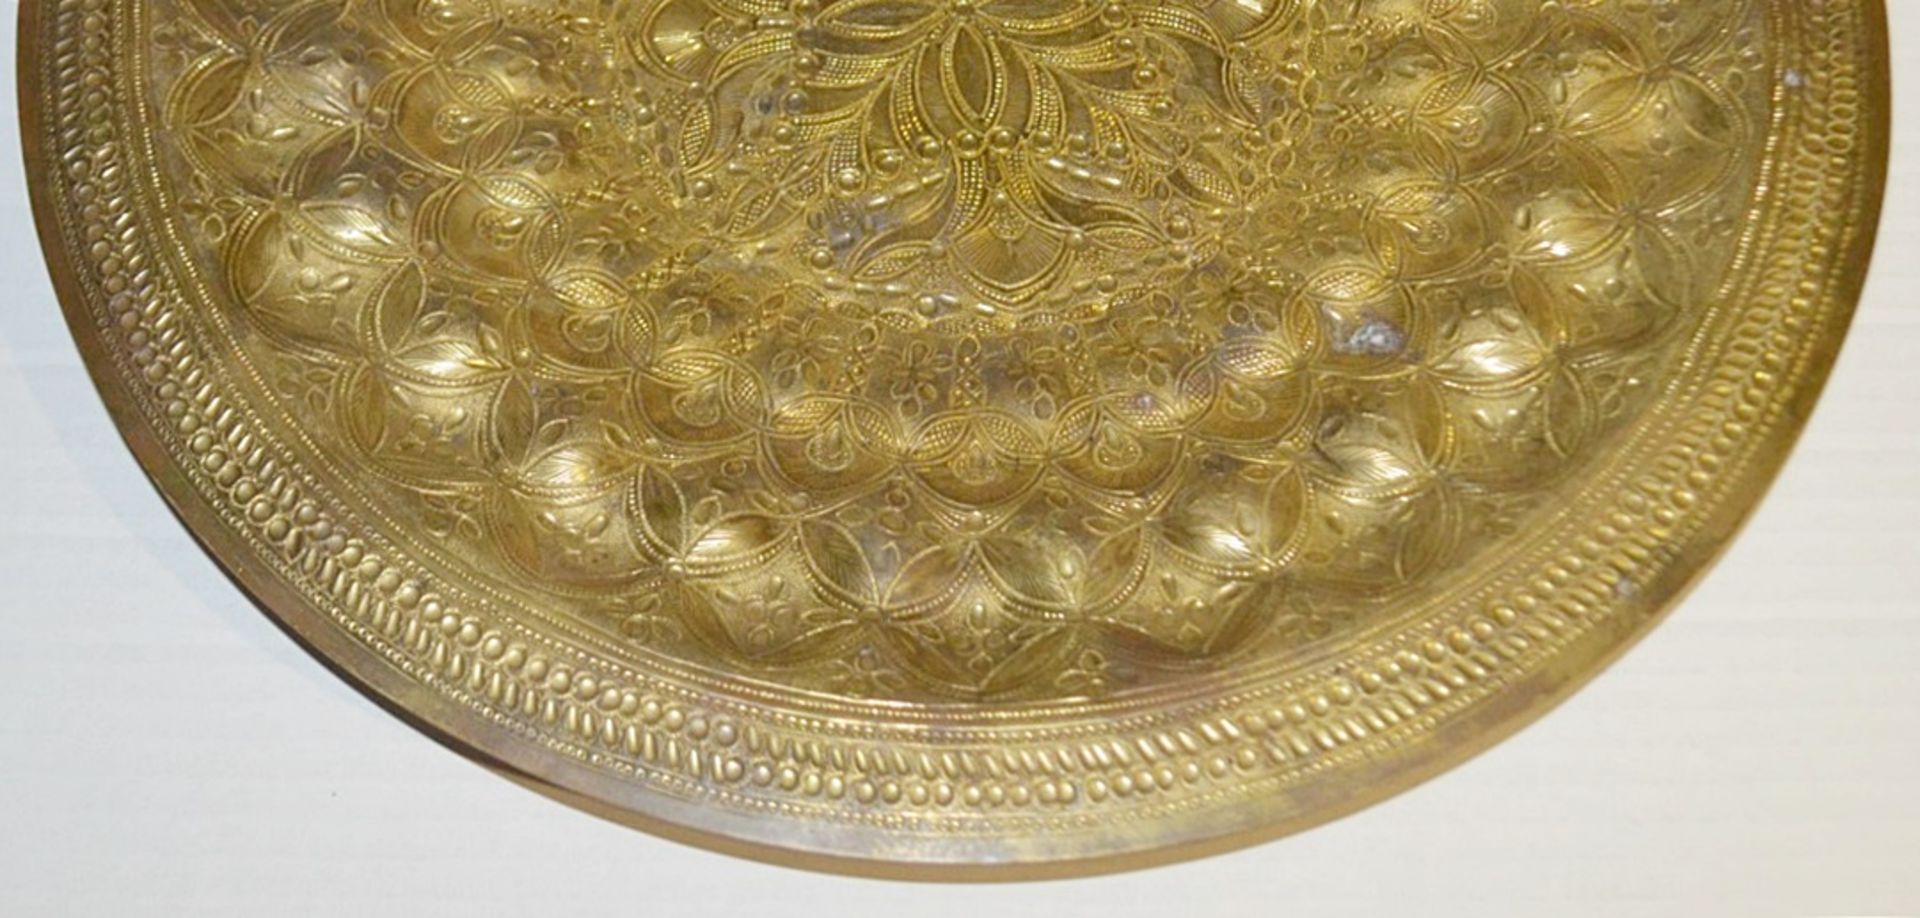 1 x Persian / Ottoman Gilt Metal Tombak Charger - 35cm (13.75ins) In Diameter - Preowned - NO VAT ON - Image 2 of 5